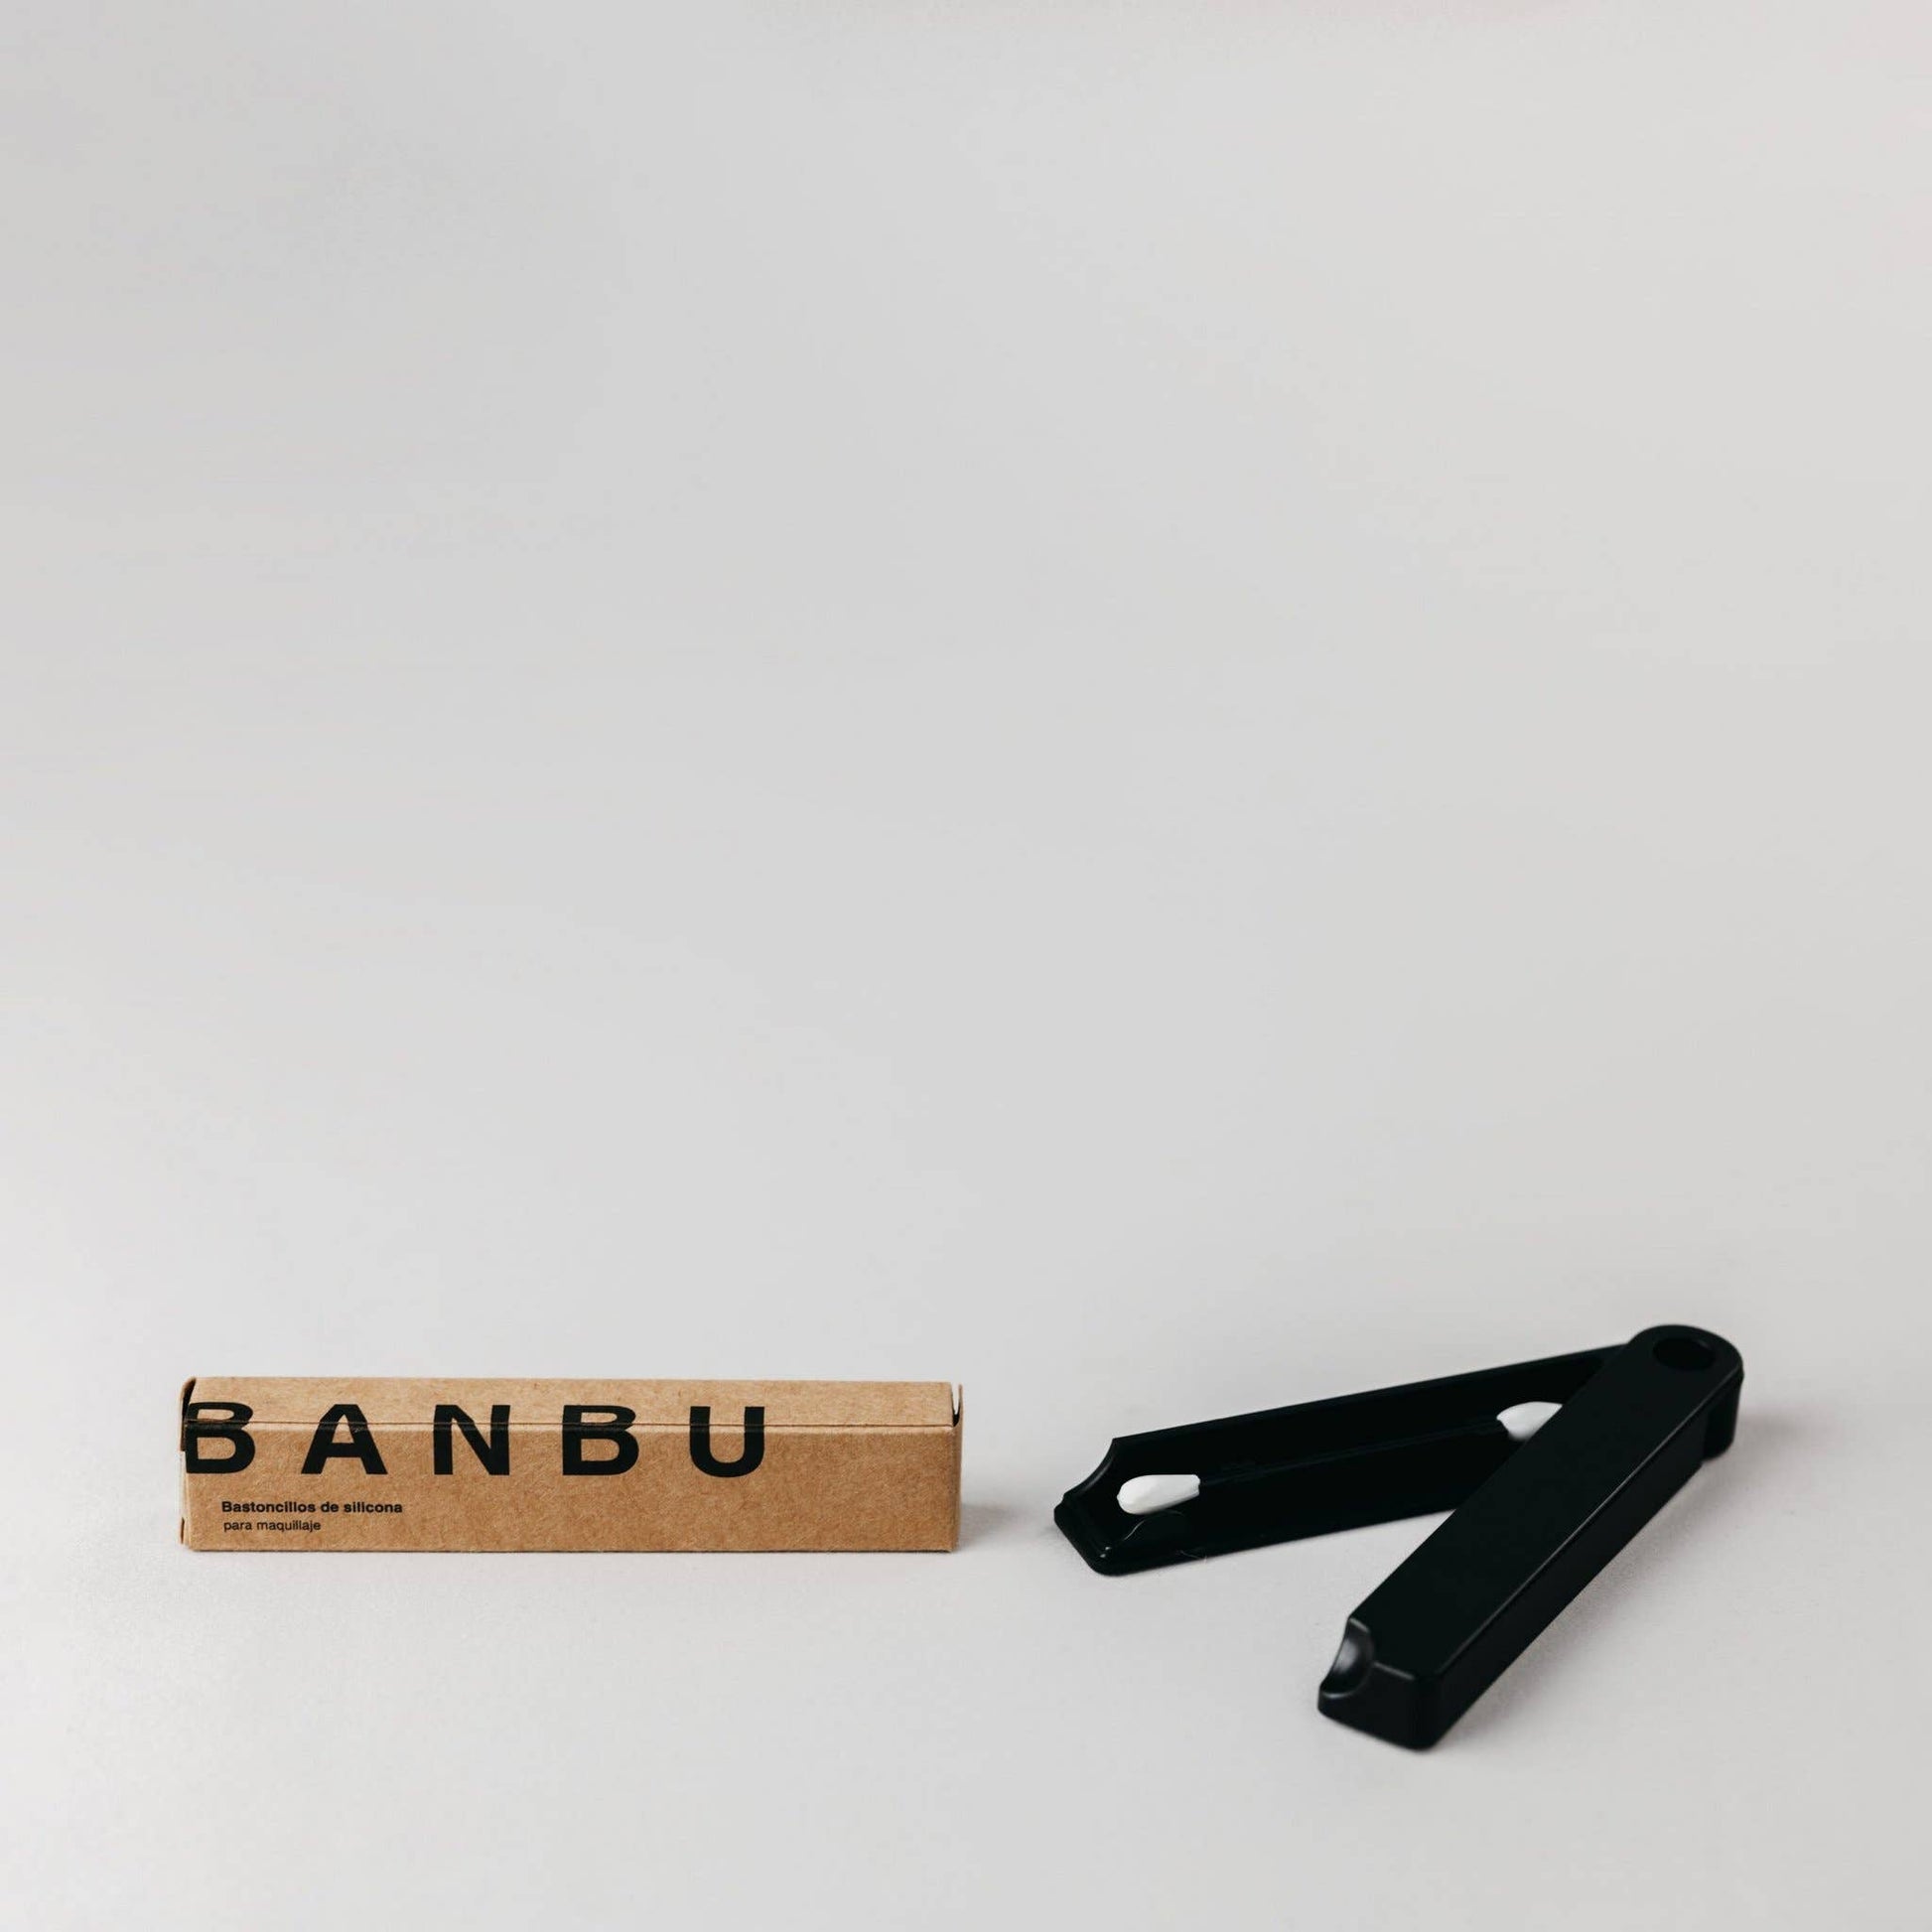 Eco-friendly, reusable makeup applicators by Banbu, offering precision and sustainability